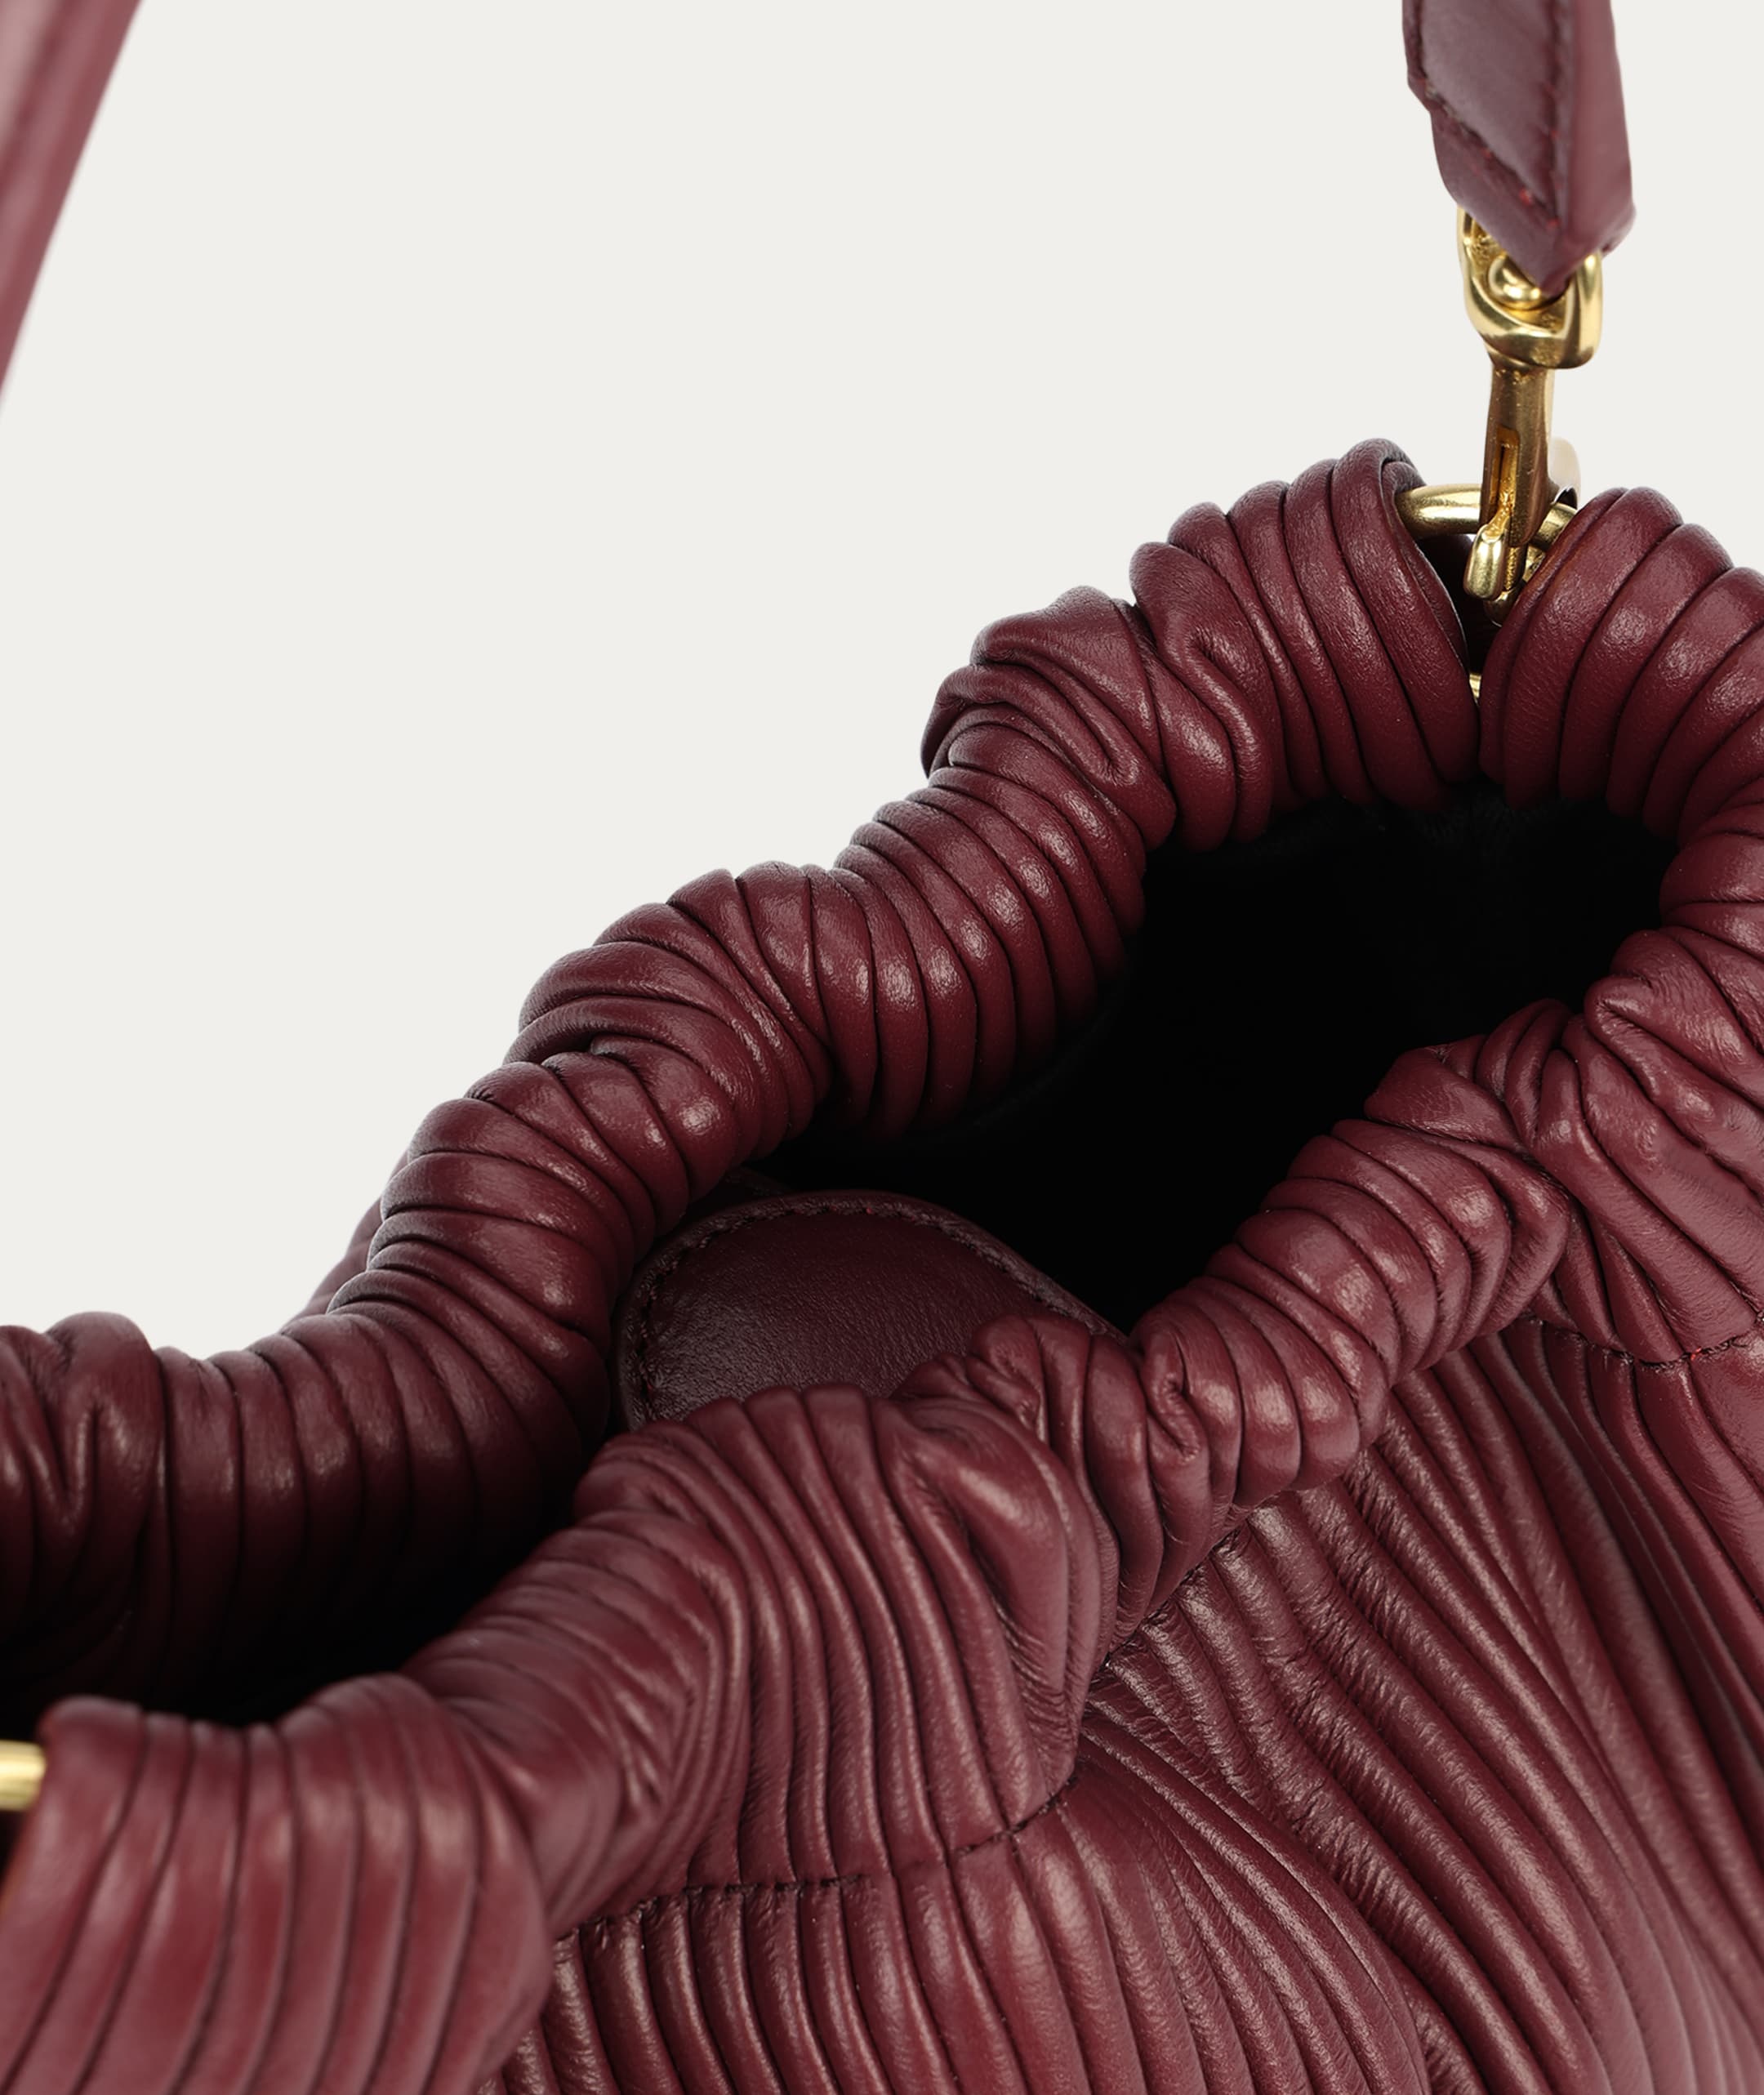 Deadly Ponies | Mr Cinch Mini - Claret Pleated